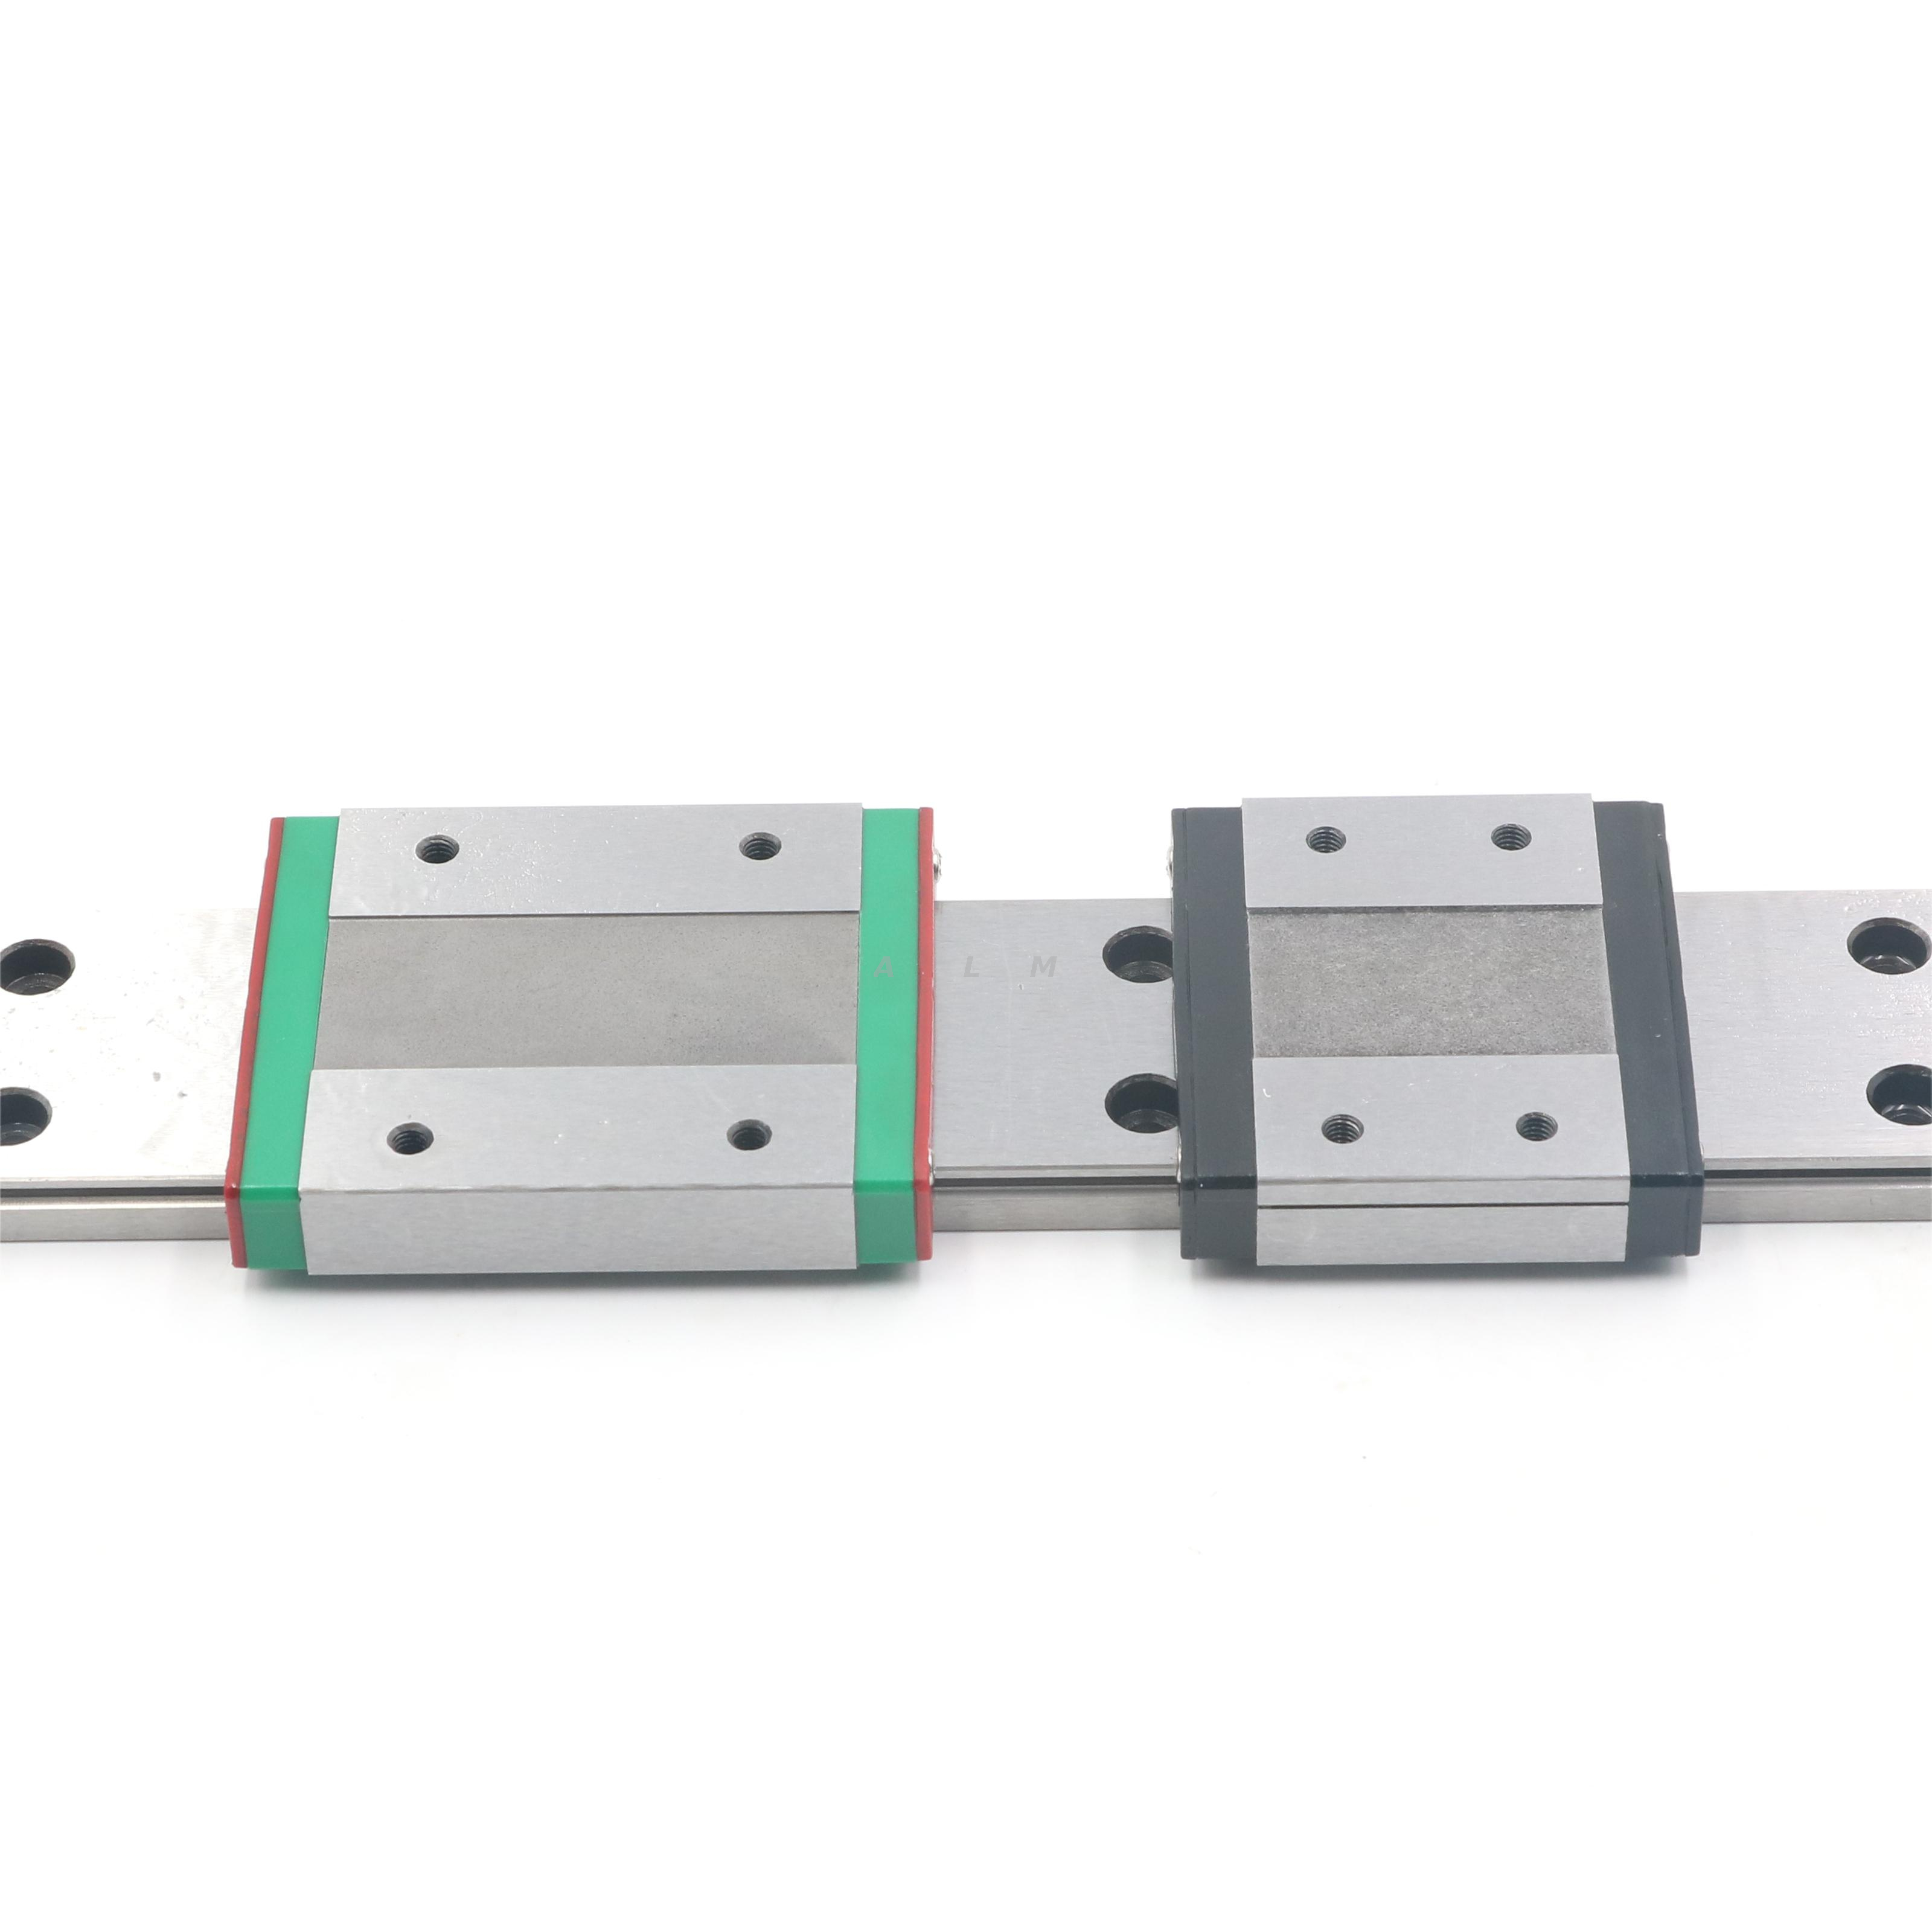 Miniature MGW15C Linear Guide and linear slider for CNC Router